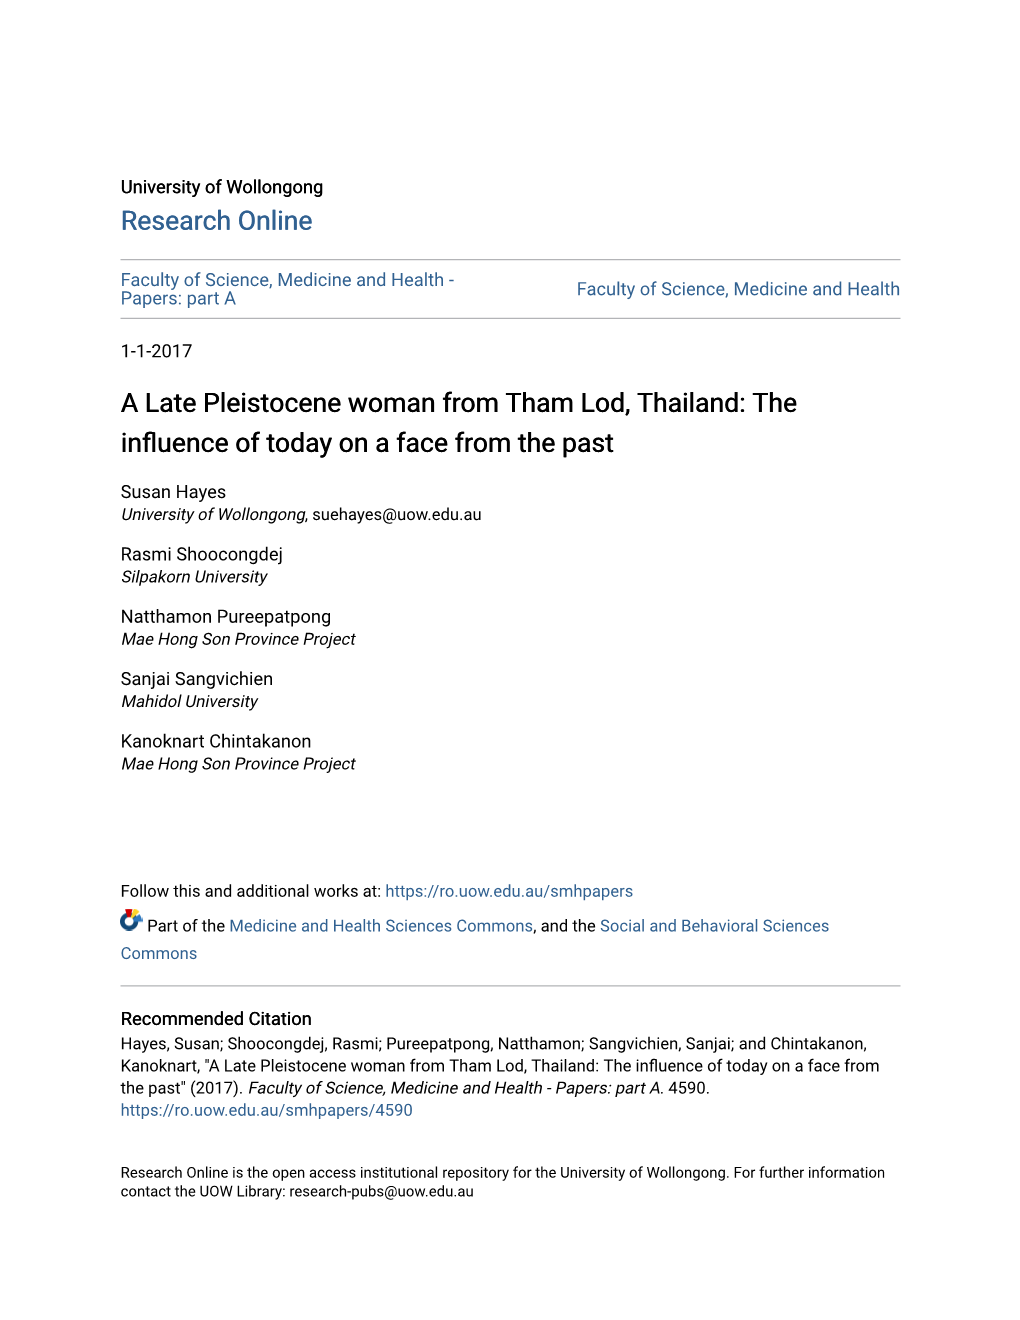 A Late Pleistocene Woman from Tham Lod, Thailand: the Influence of Odat Y on a Face from the Past